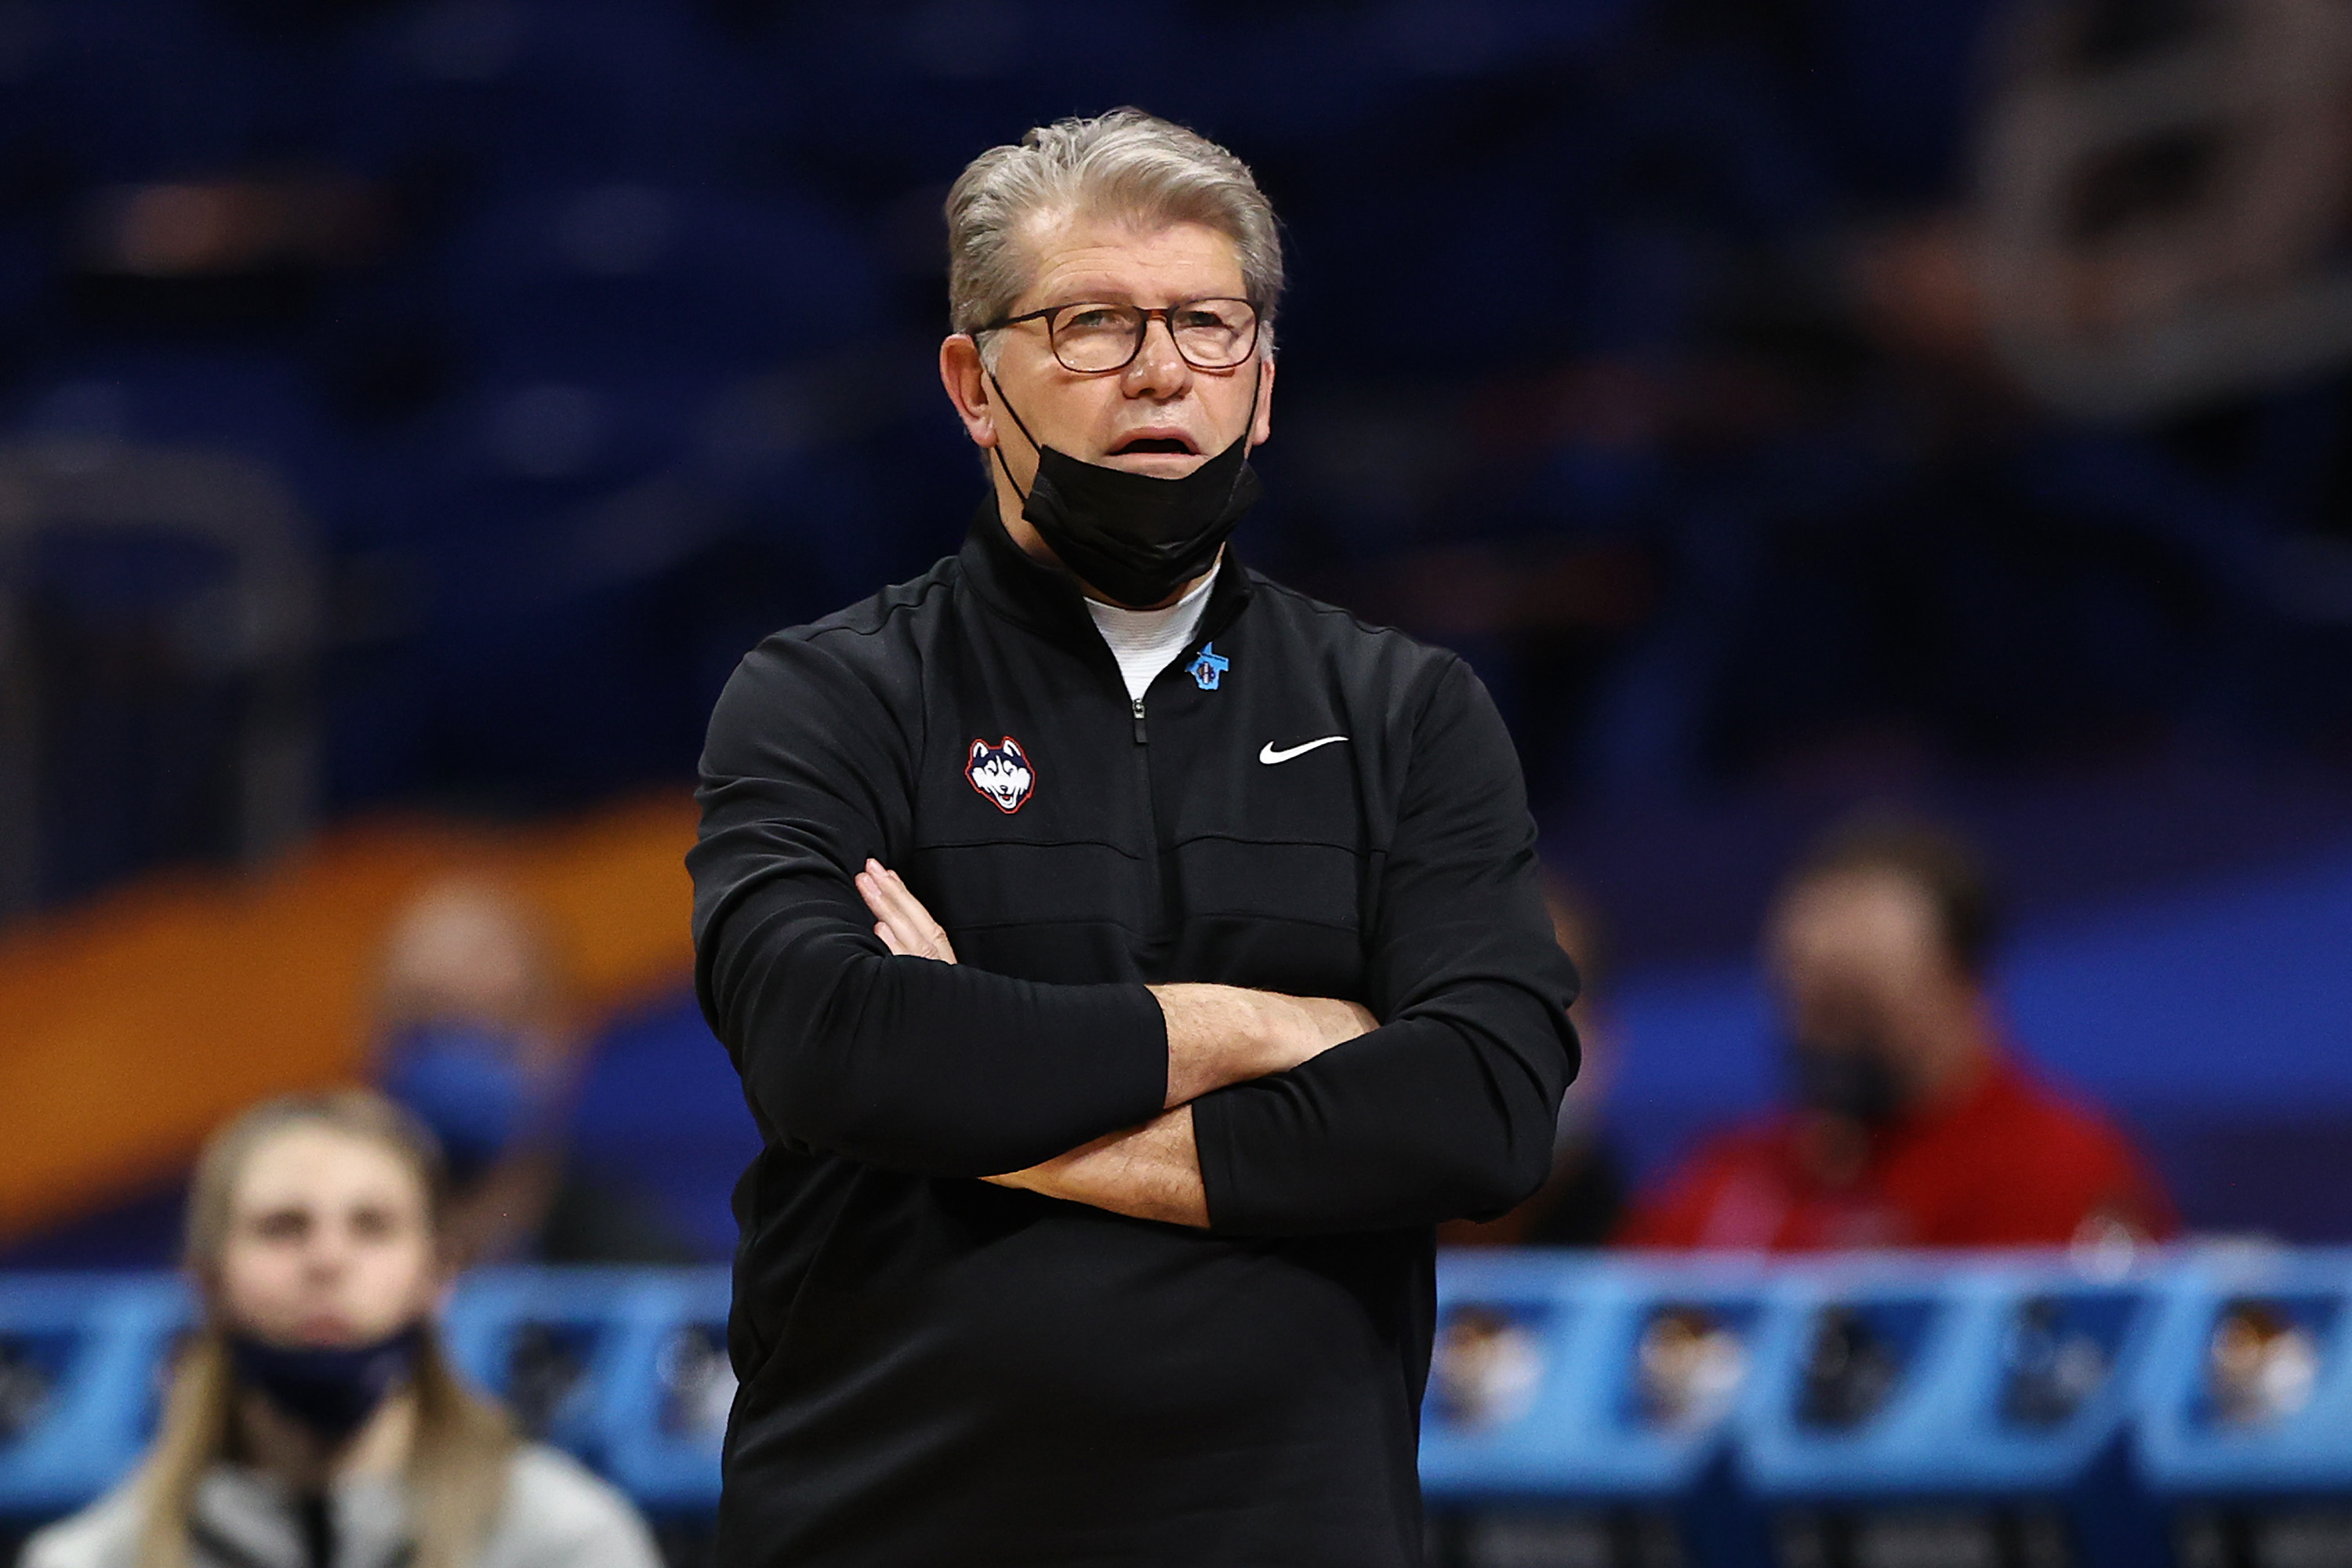 Geno Auriemma of the Connecticut Huskies looks on during Final Four